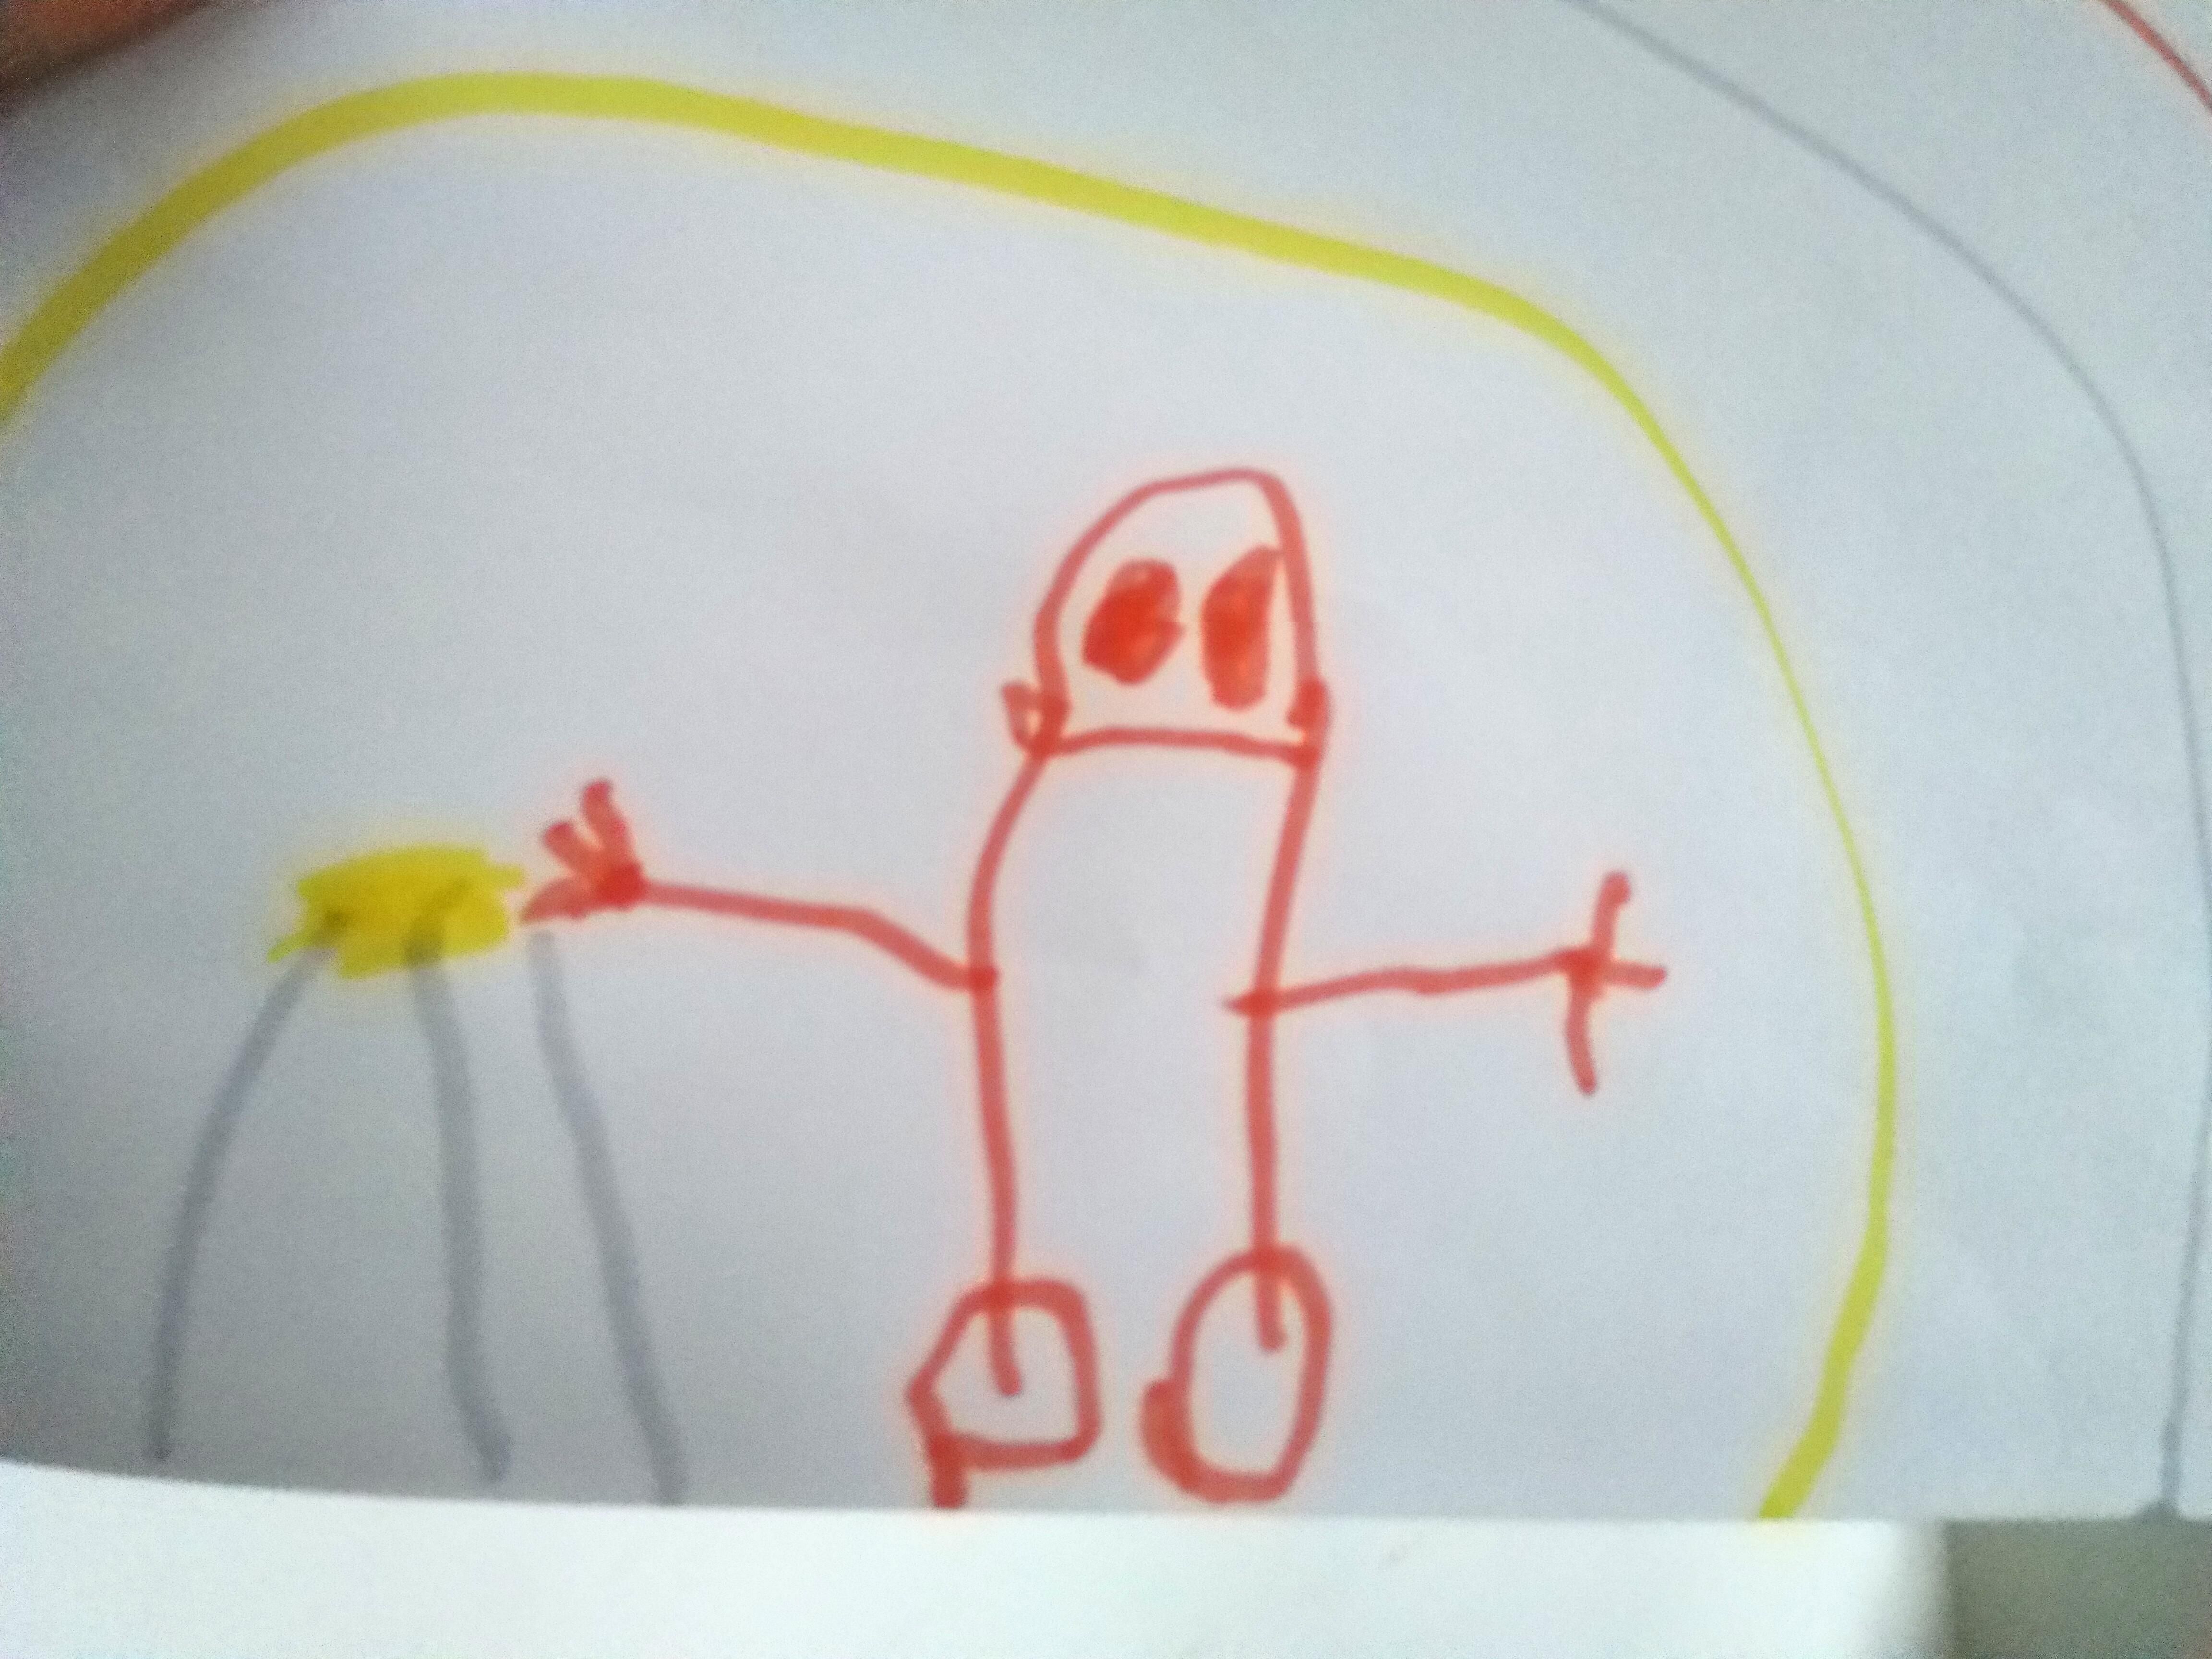 My 5 year old sons picture of me :/